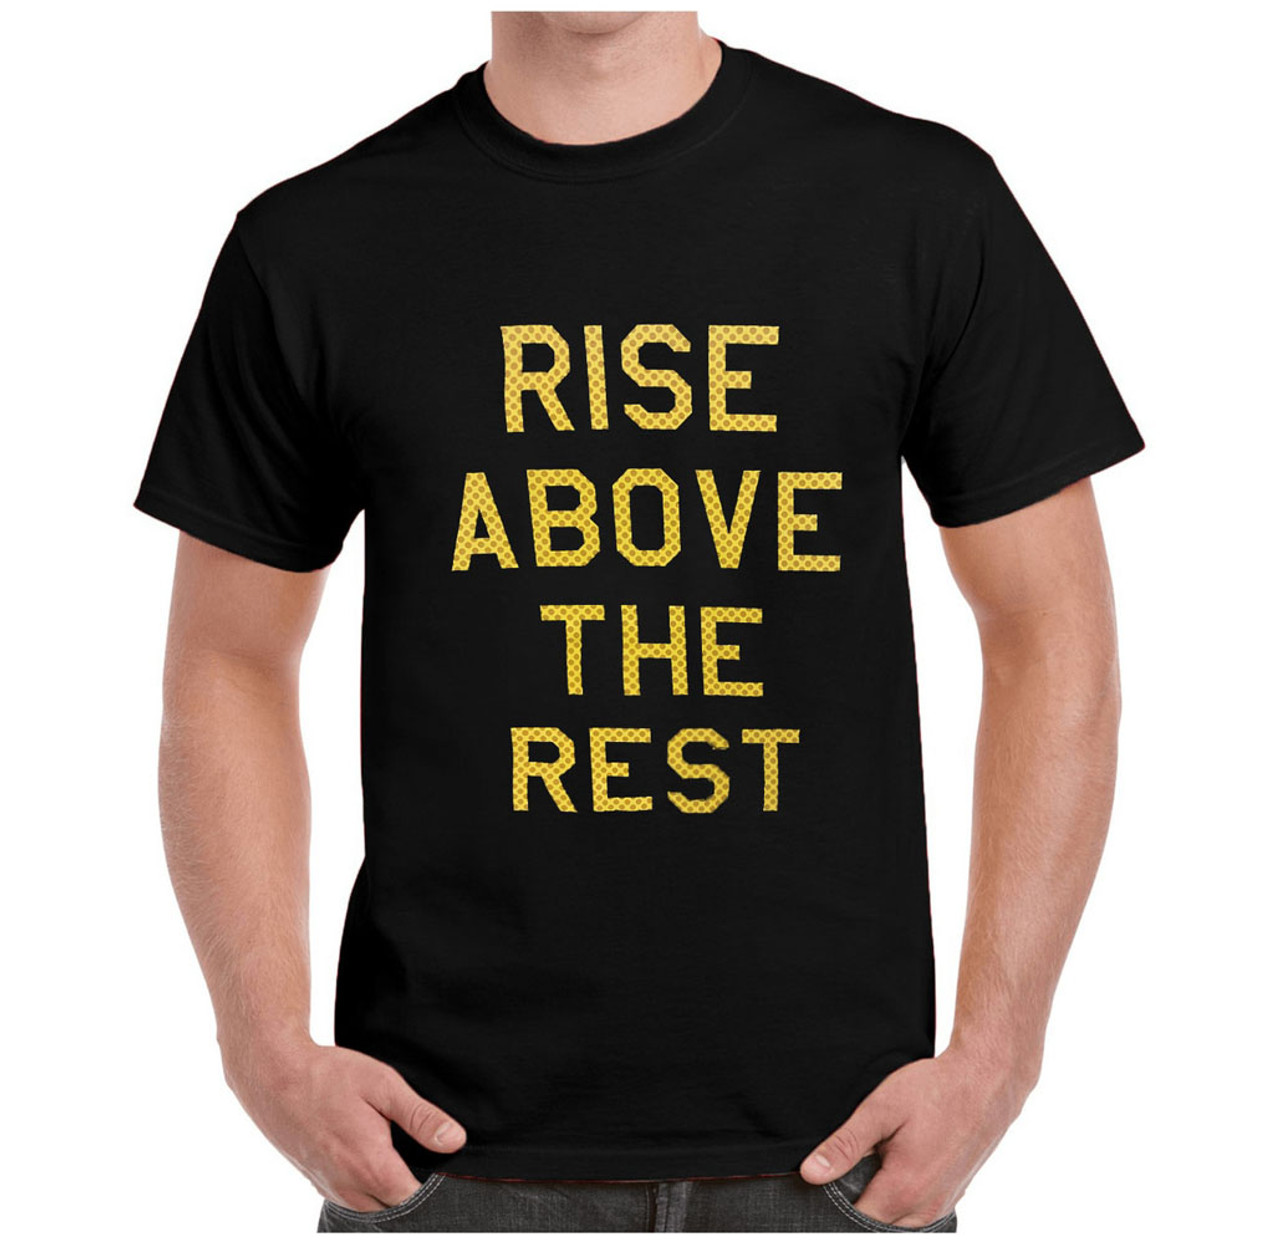 New Balance Men’s Rise Above The Rest T-Shirt product image